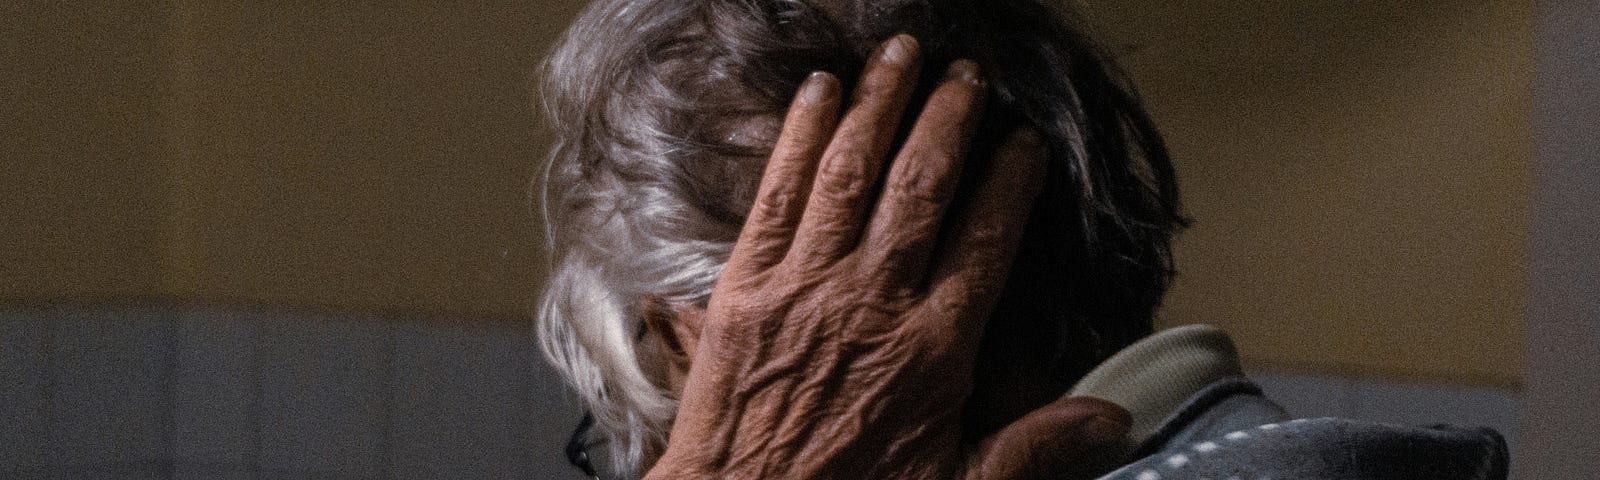 This is a photo of an older woman holding her hand behind her head as I often do these days.